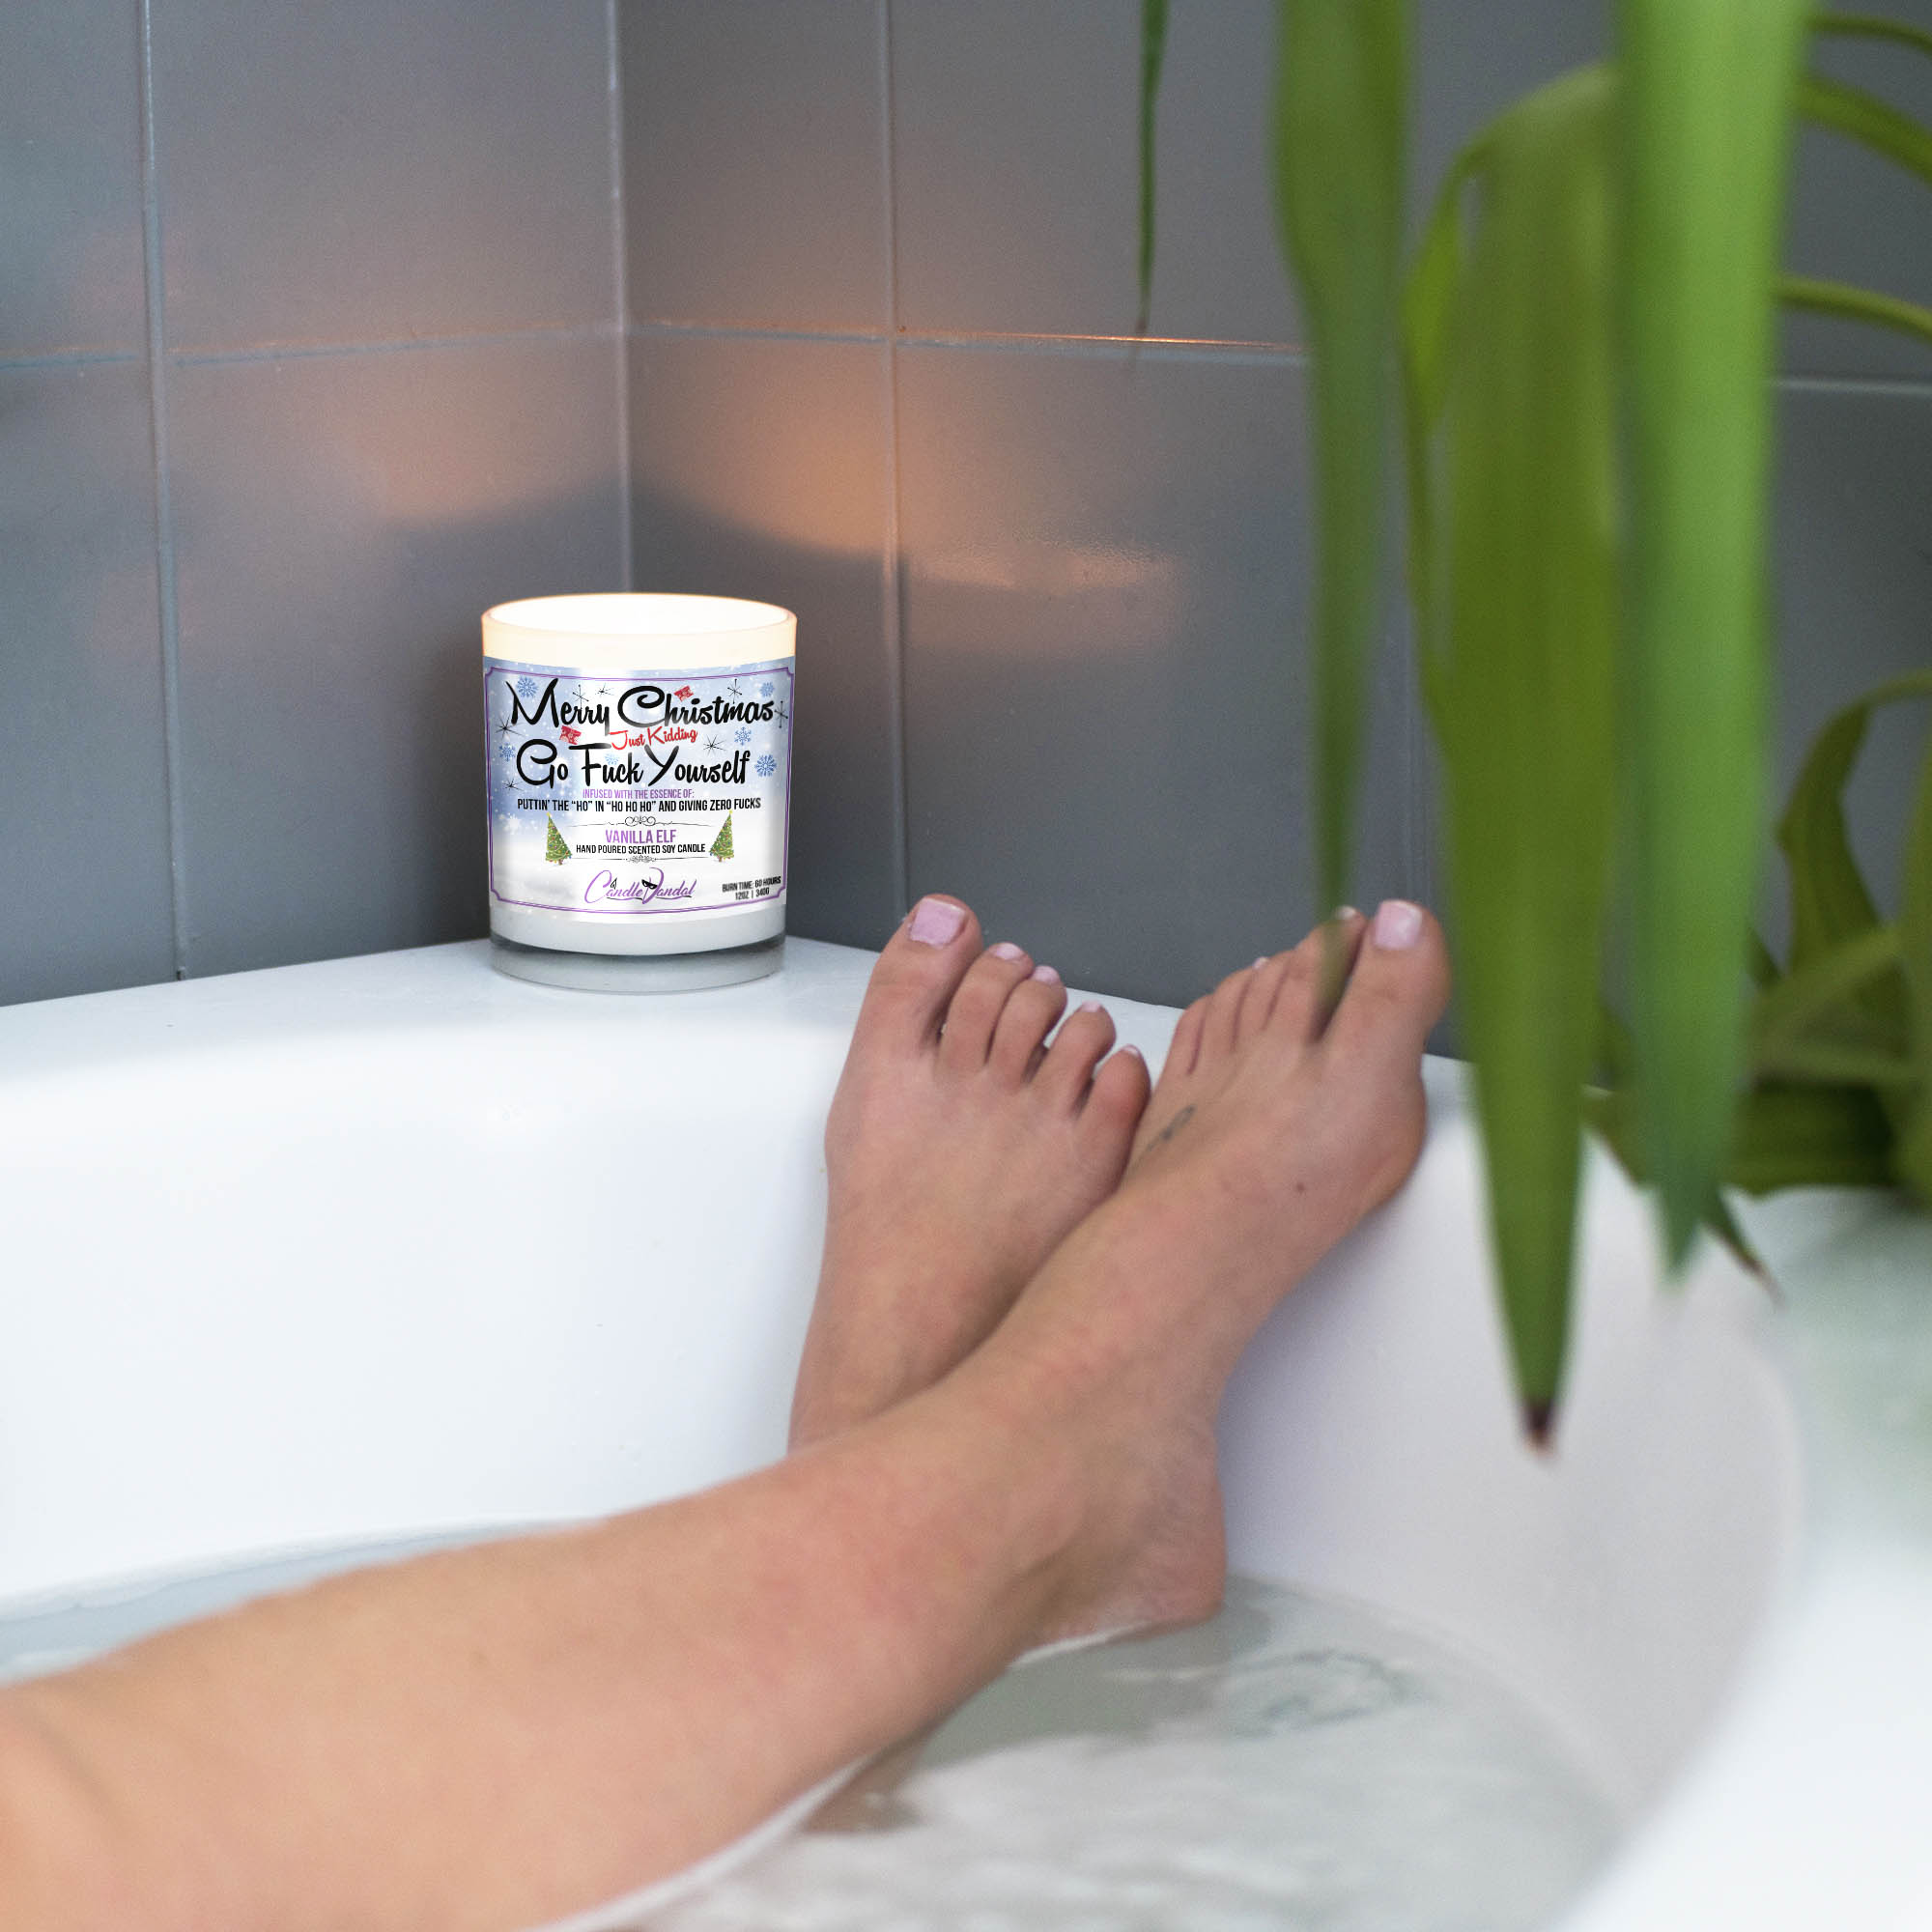 https://candlevandal.com/wp-content/uploads/2021/01/merry-christmas-just-kidding-go-fuck-yourself-bathtub-candle.jpg